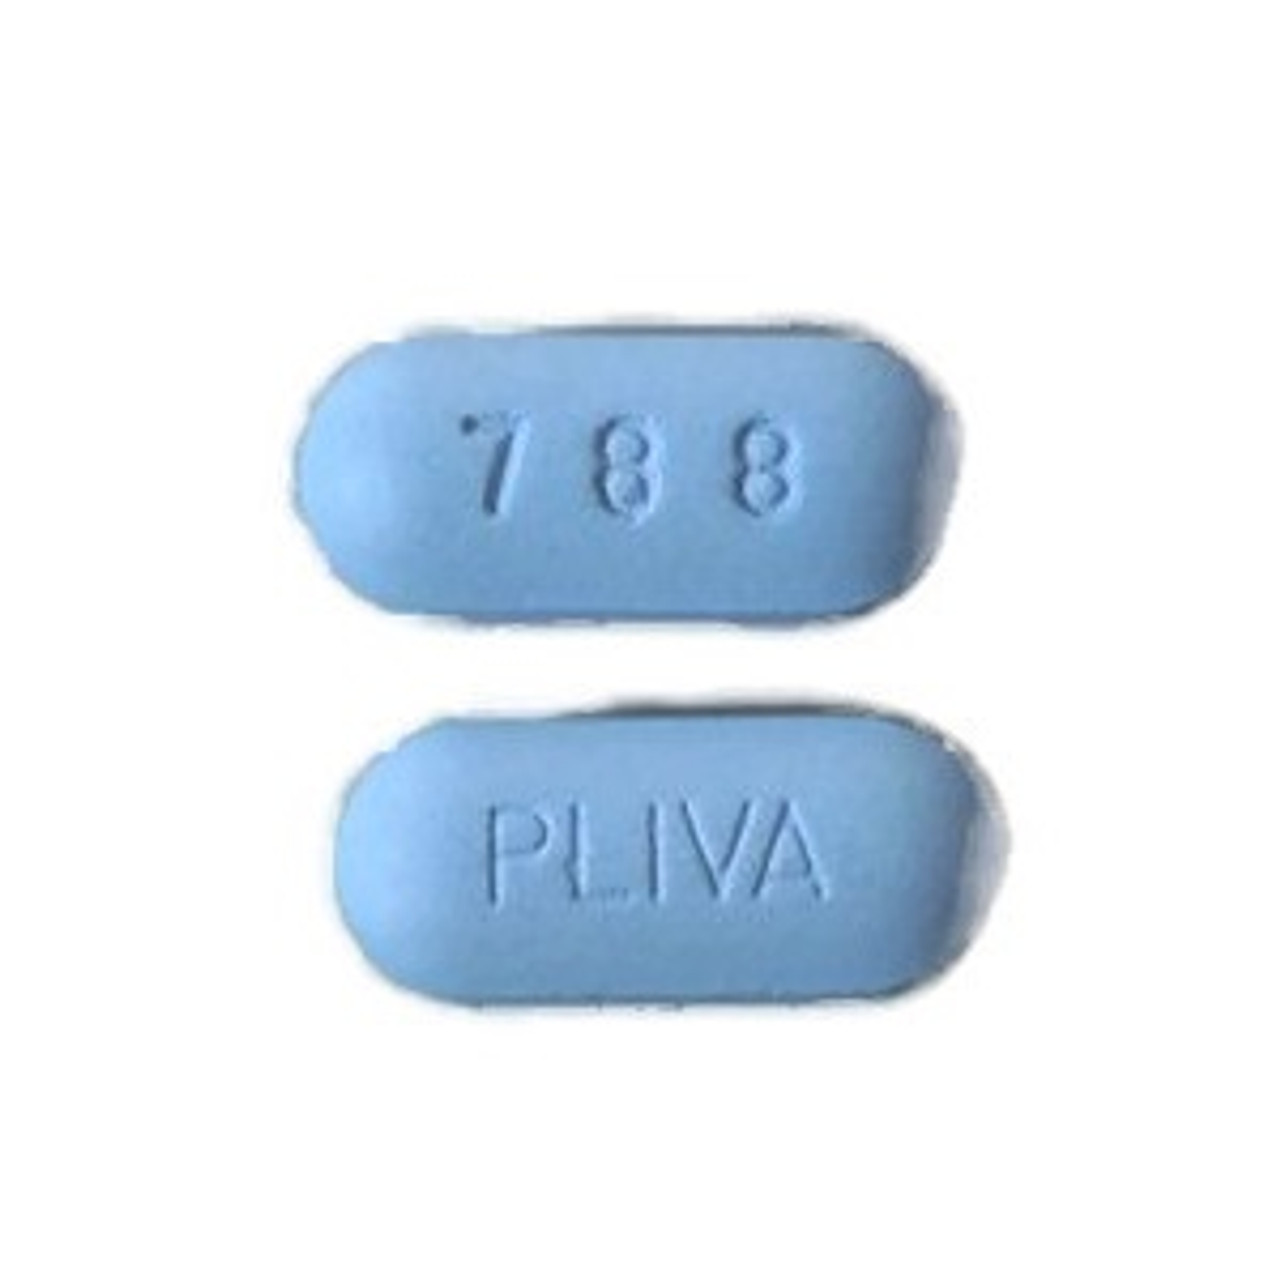 Teva 500mg Azithromycin Film Tablets - 9 Tablets Predictable Surgical Technologies